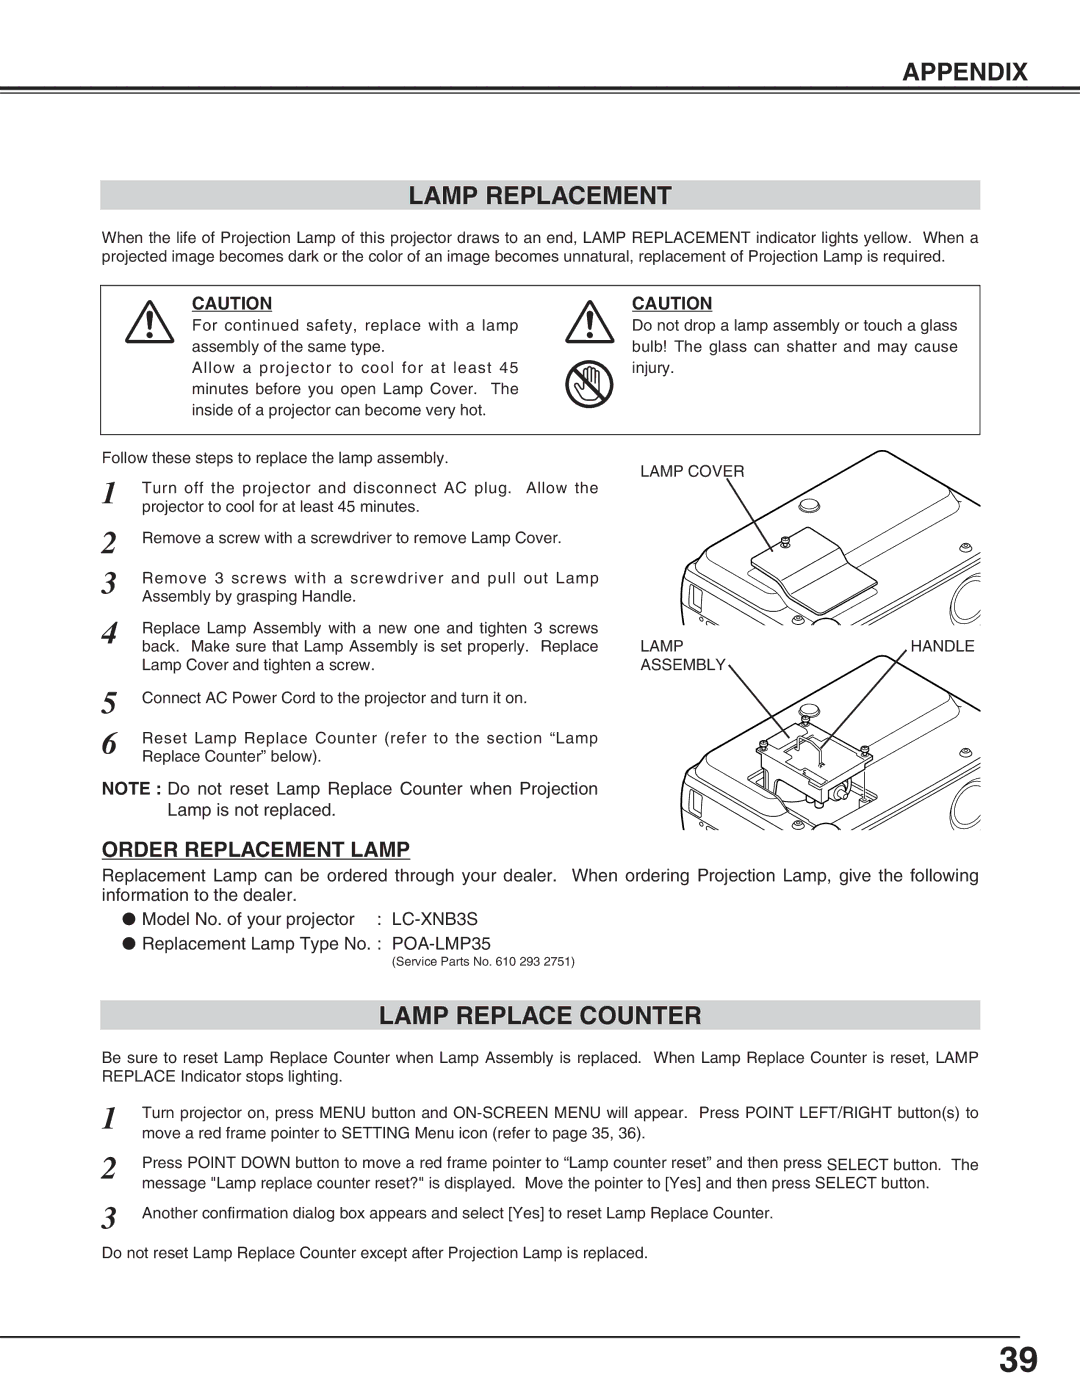 Eiki LC-XNB3S owner manual Appendix Lamp Replacement, Lamp Replace Counter 